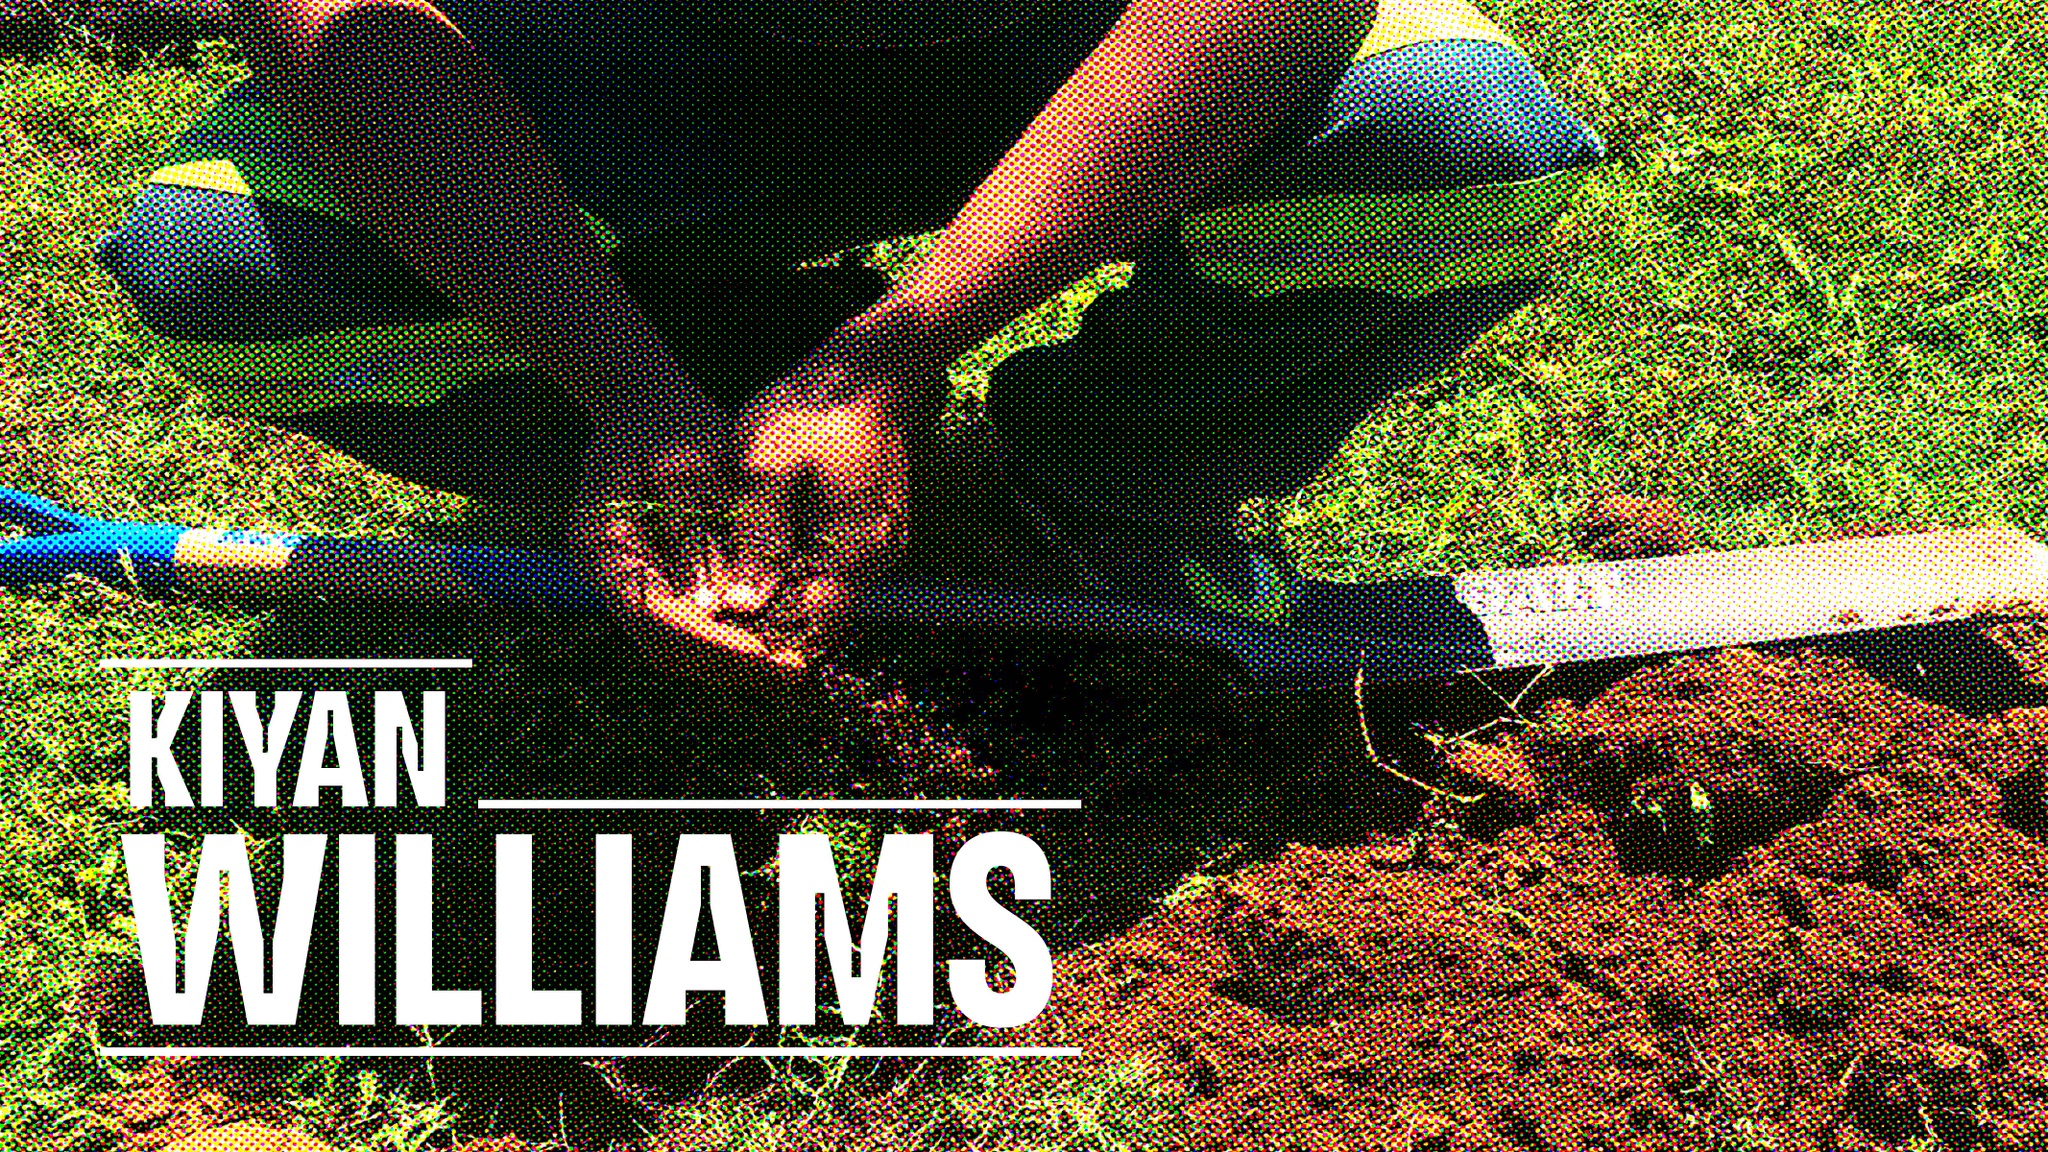 A person crouches on green grass over a shovel and upturned earth with their hands joined together with the name Kiyan Williams overlaid in white text